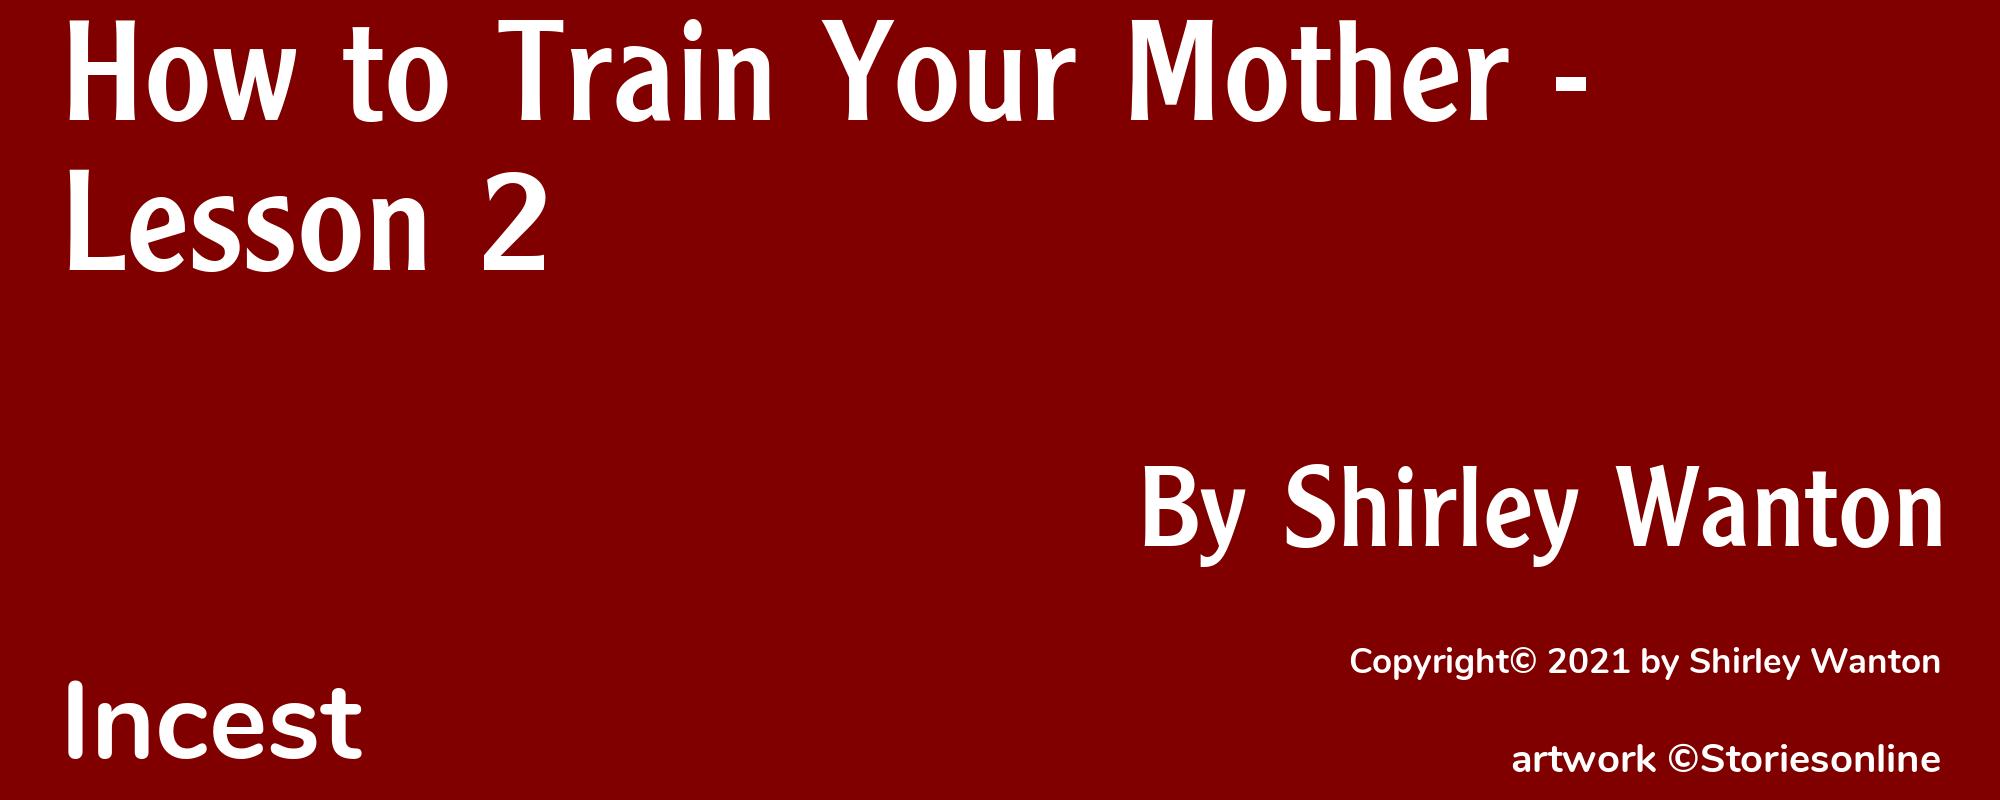 How to Train Your Mother - Lesson 2 - Cover